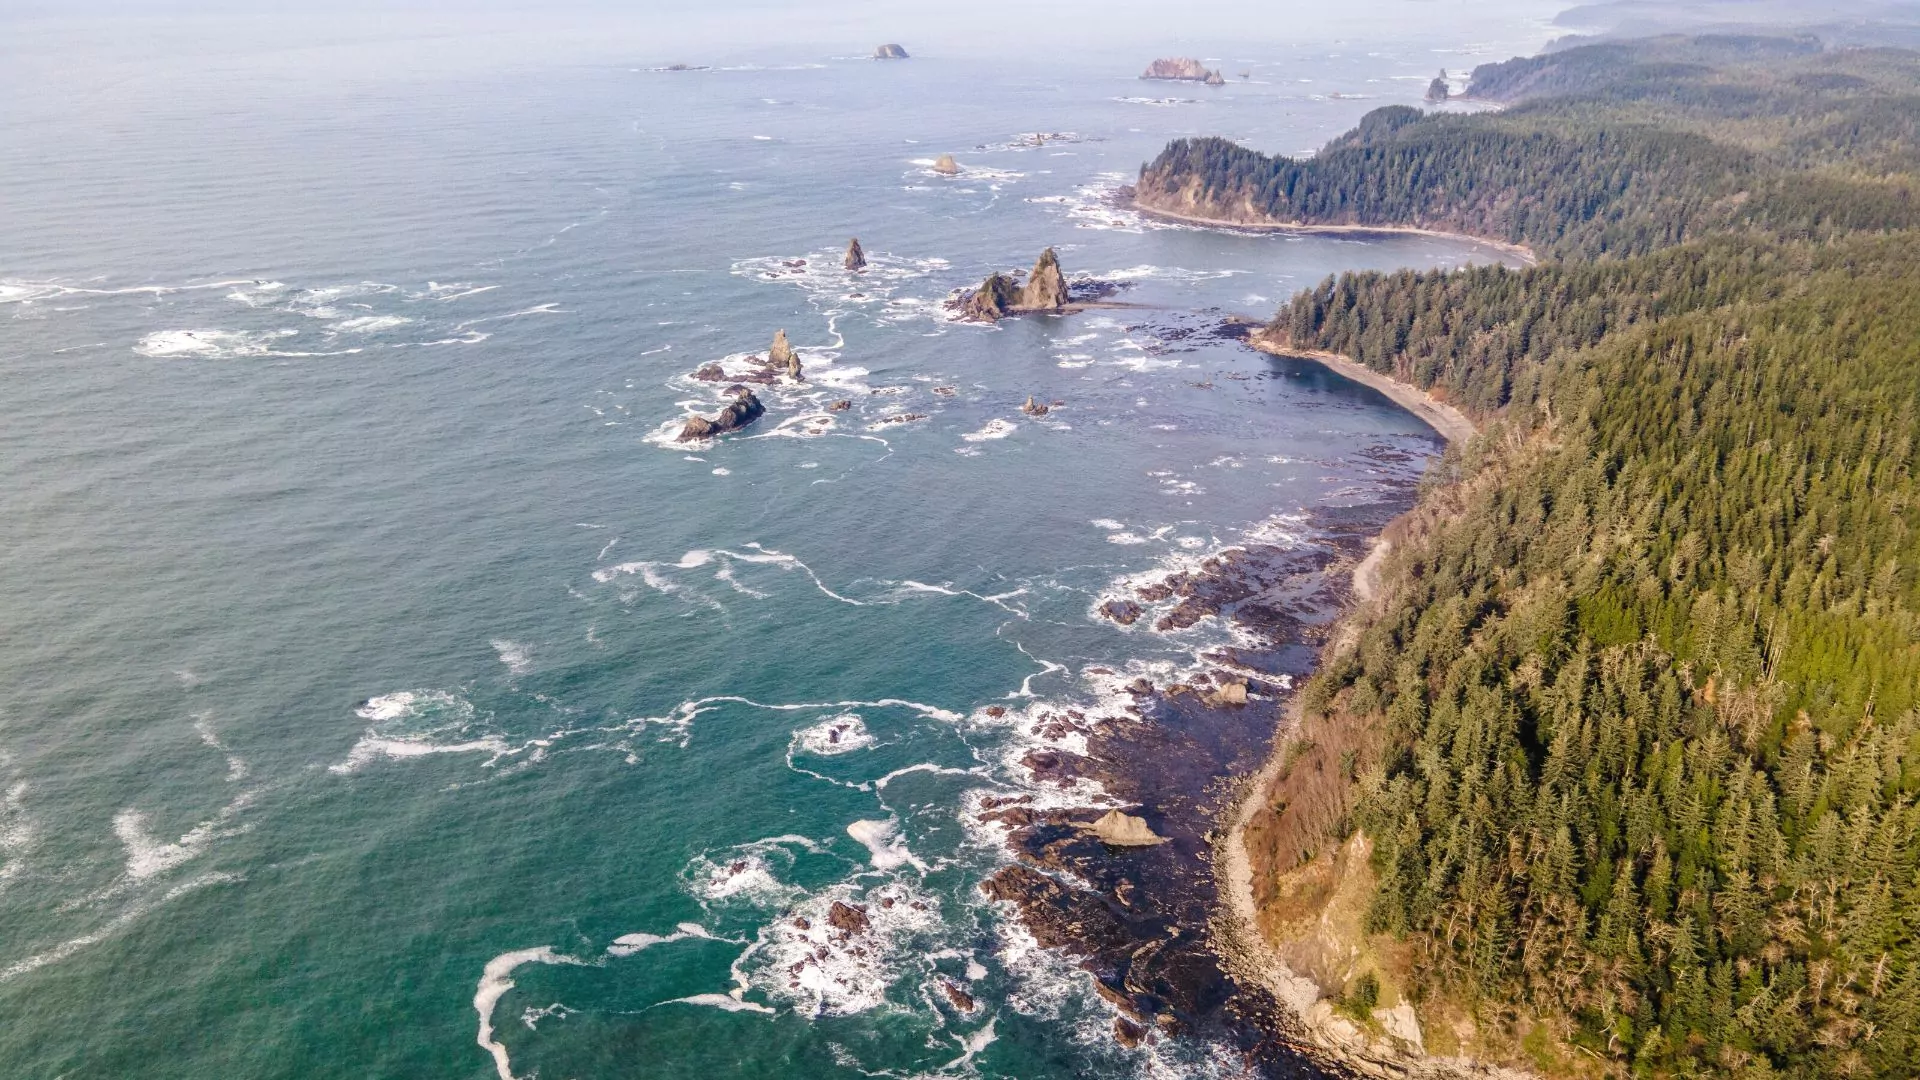 Aerial view of the Olympic Peninsula coast